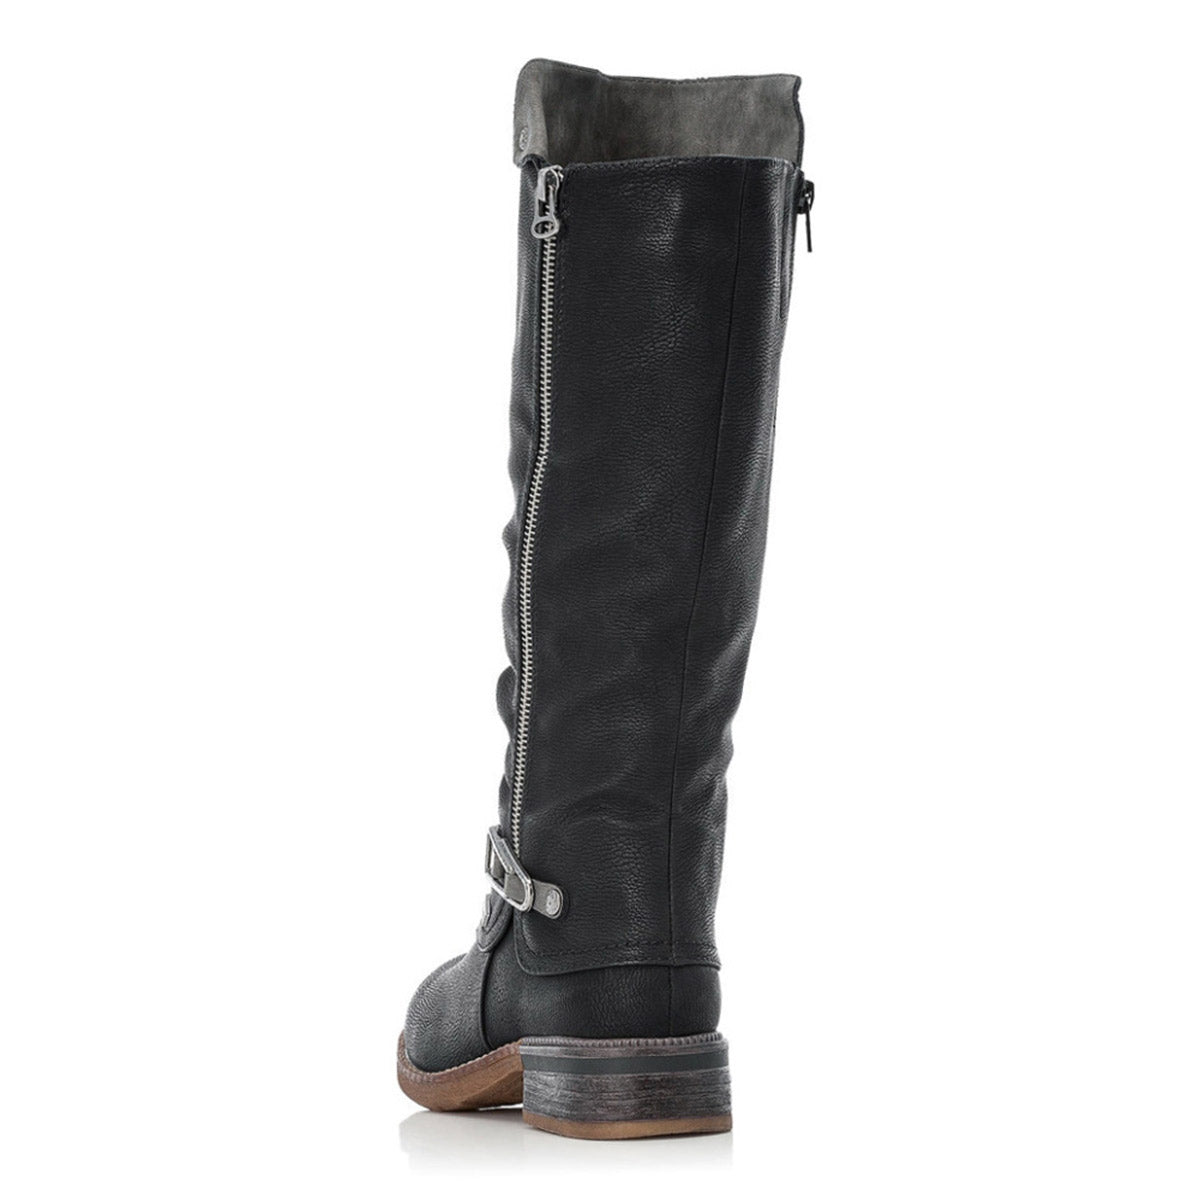 A single RIEKER FABRIZIA 52 BLACK - WOMENS knee-high boot with a side zipper and a buckle at the ankle, featuring a cushioned footbed for added comfort, viewed from the back.